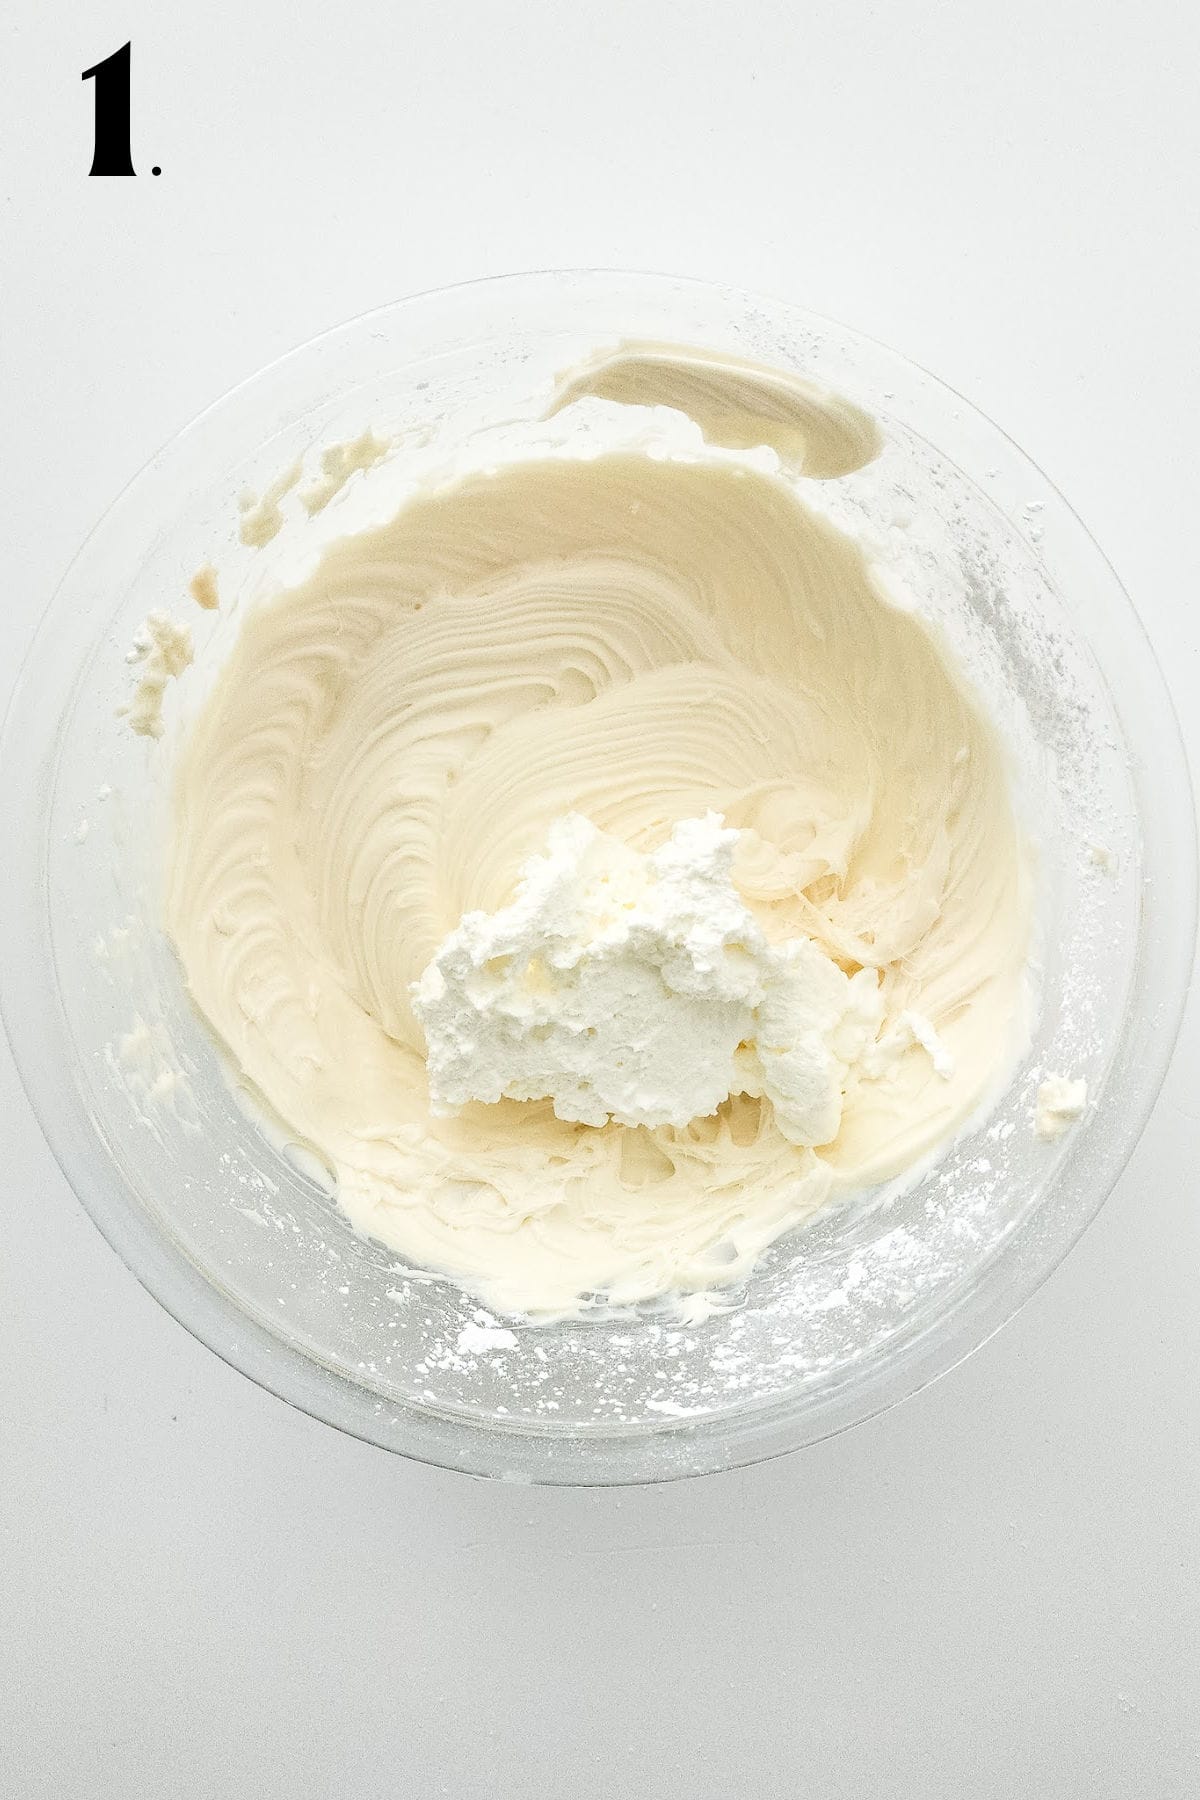 How to Make Cheesecake Mousse - Step 1 blending cream cheese mixture in bowl.